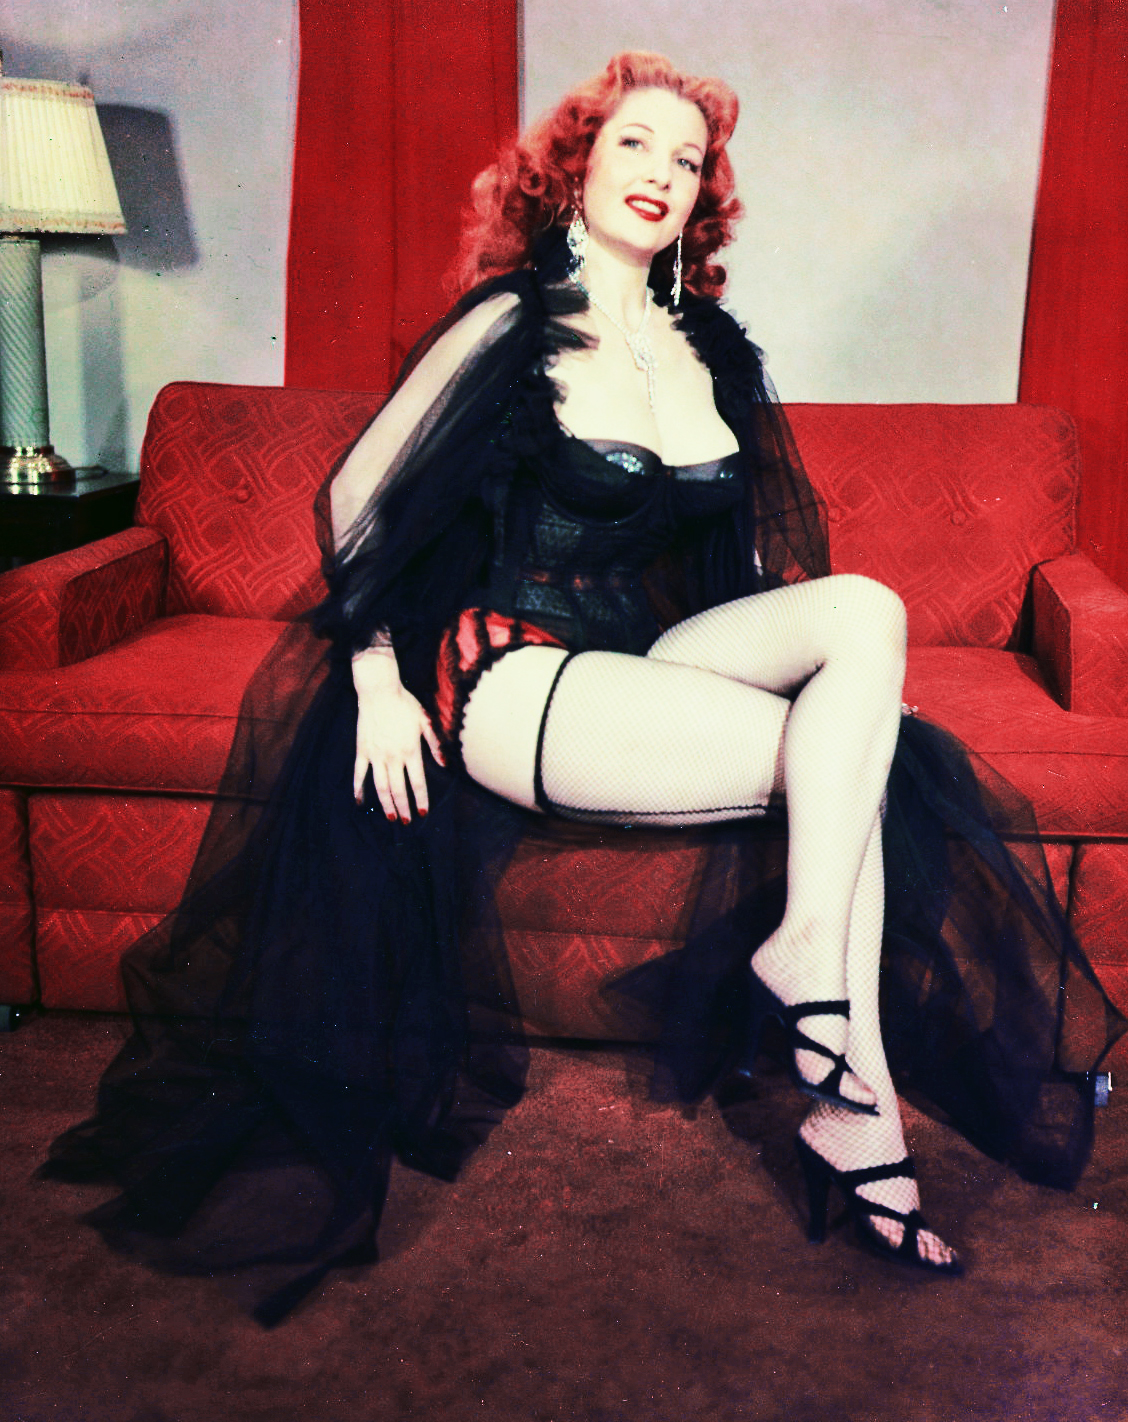 More Pictures Of Tempest Storm. images of tempest storm. 